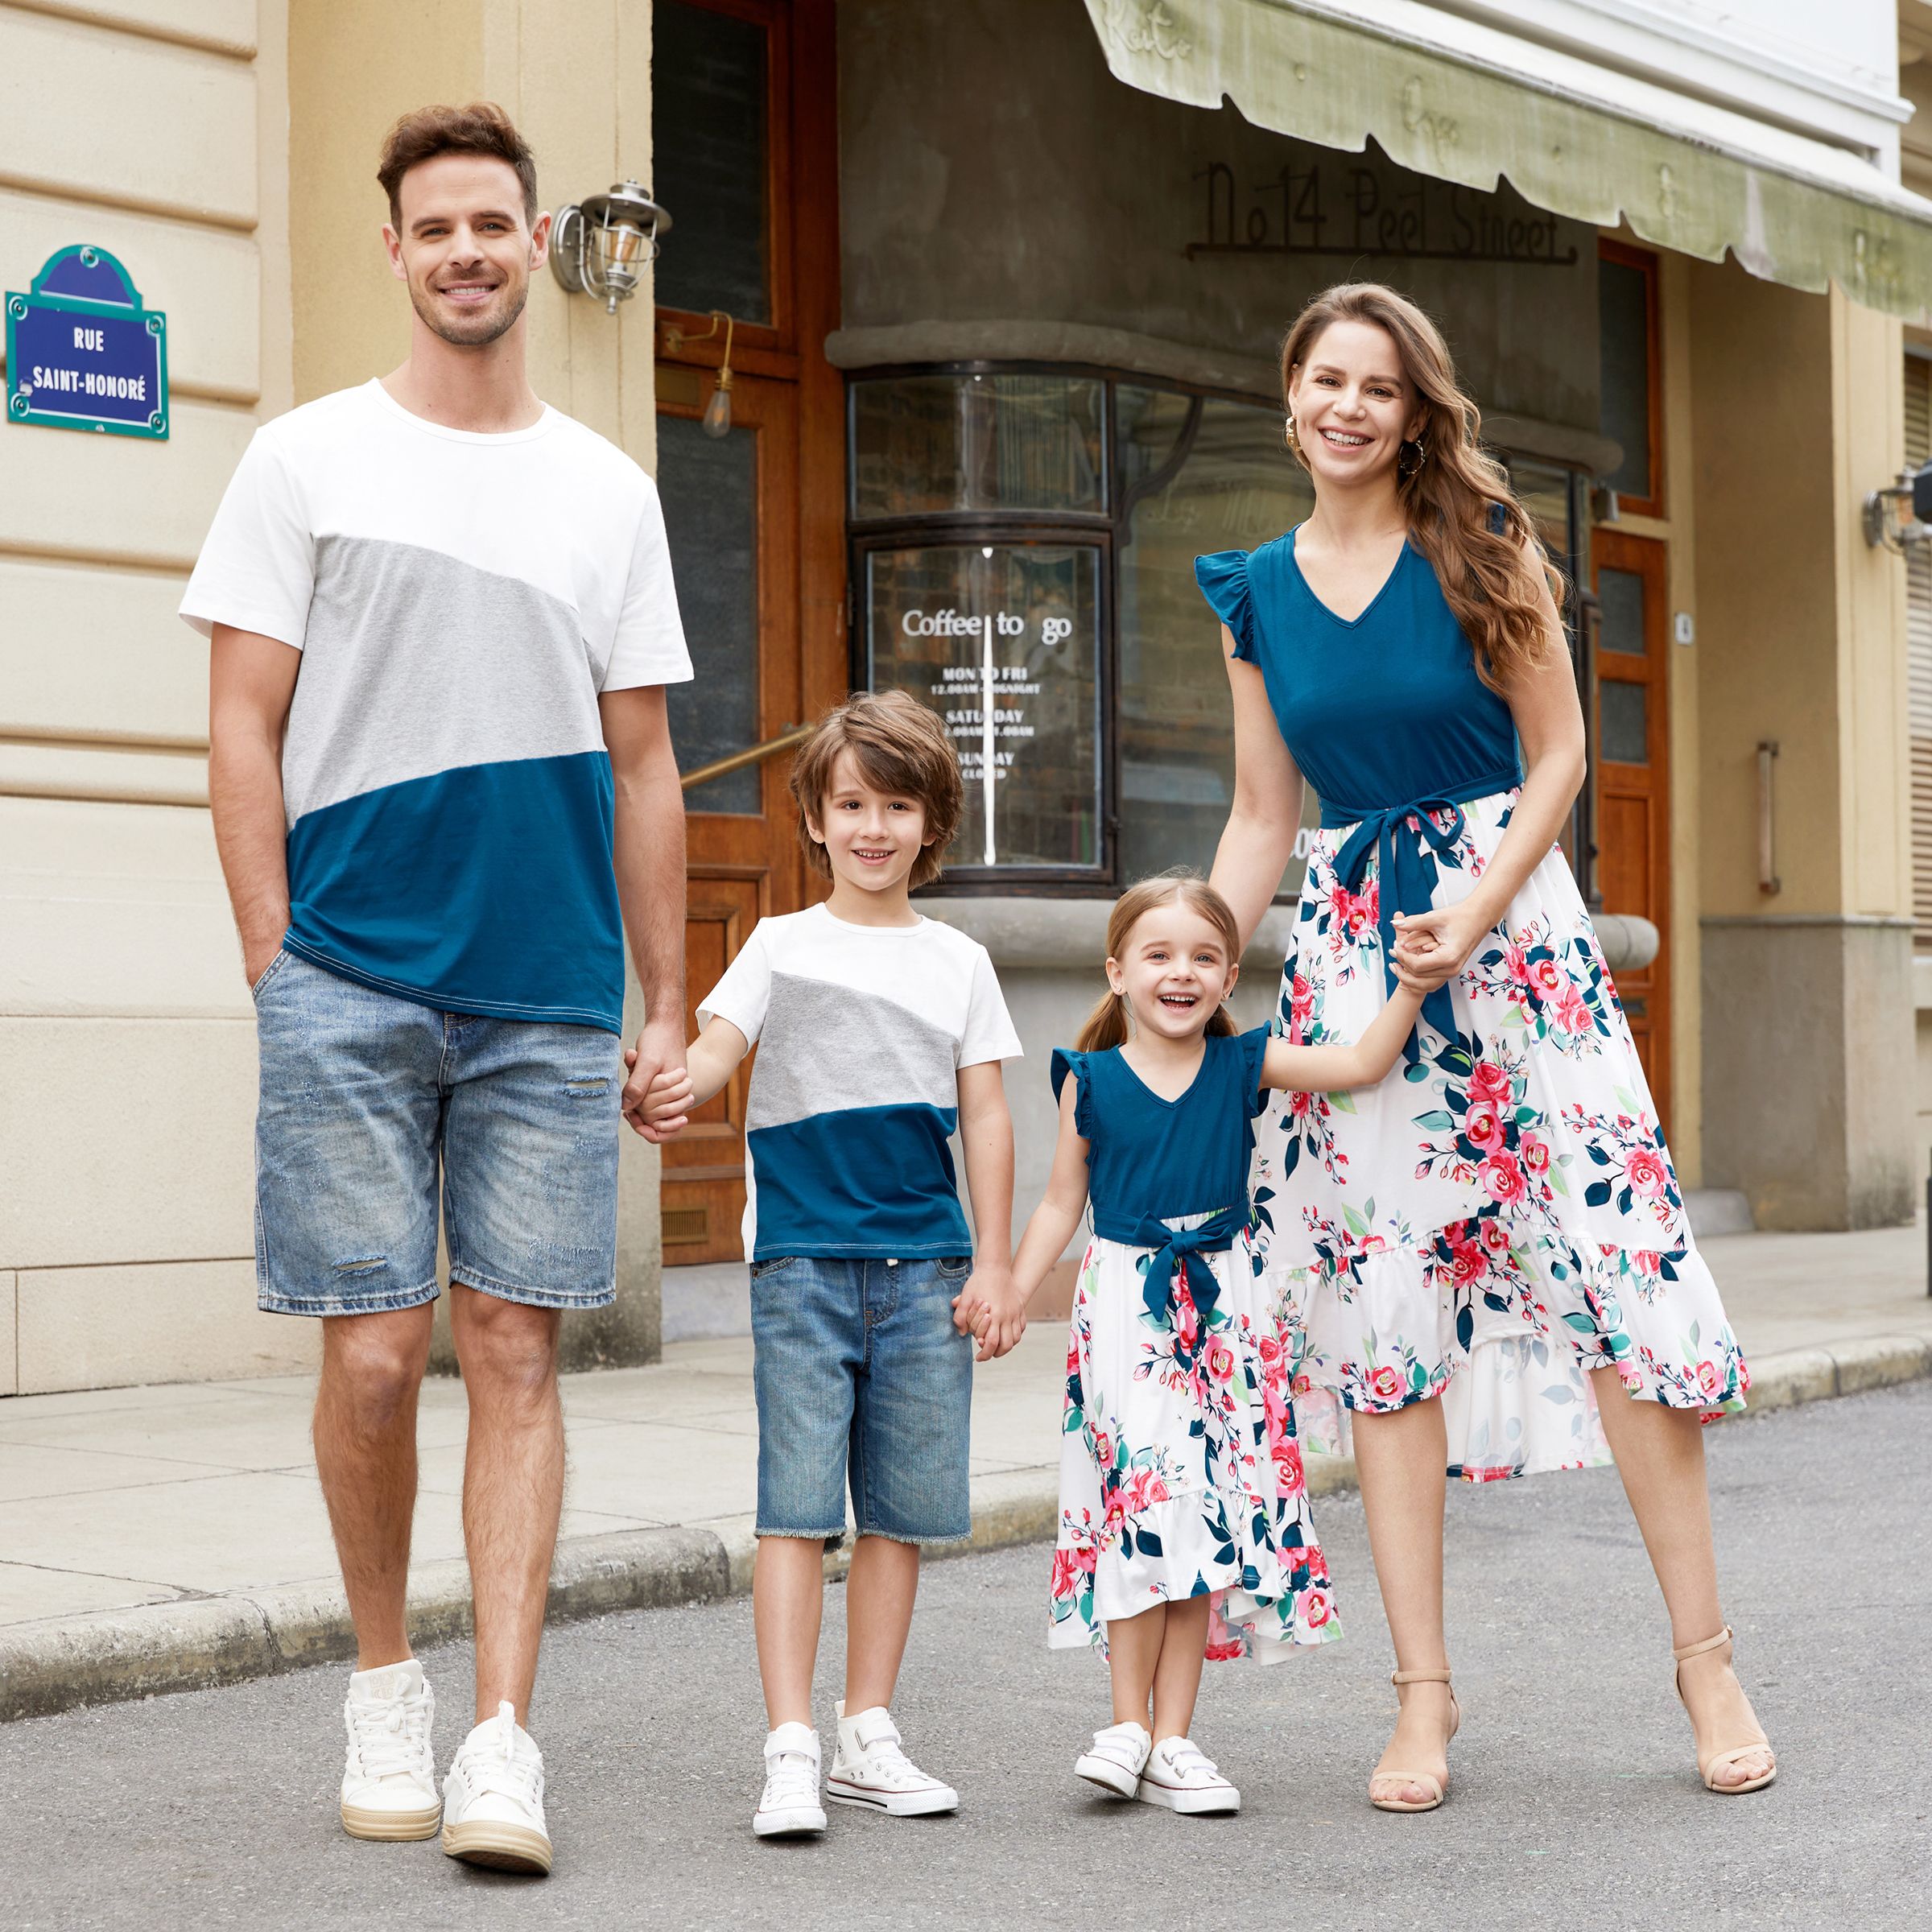 Family Matching Pink V Neck Lace Flutter-sleeve Splicing Floral Print Dresses and Short Raglan-sleeve Striped T-shirts Sets